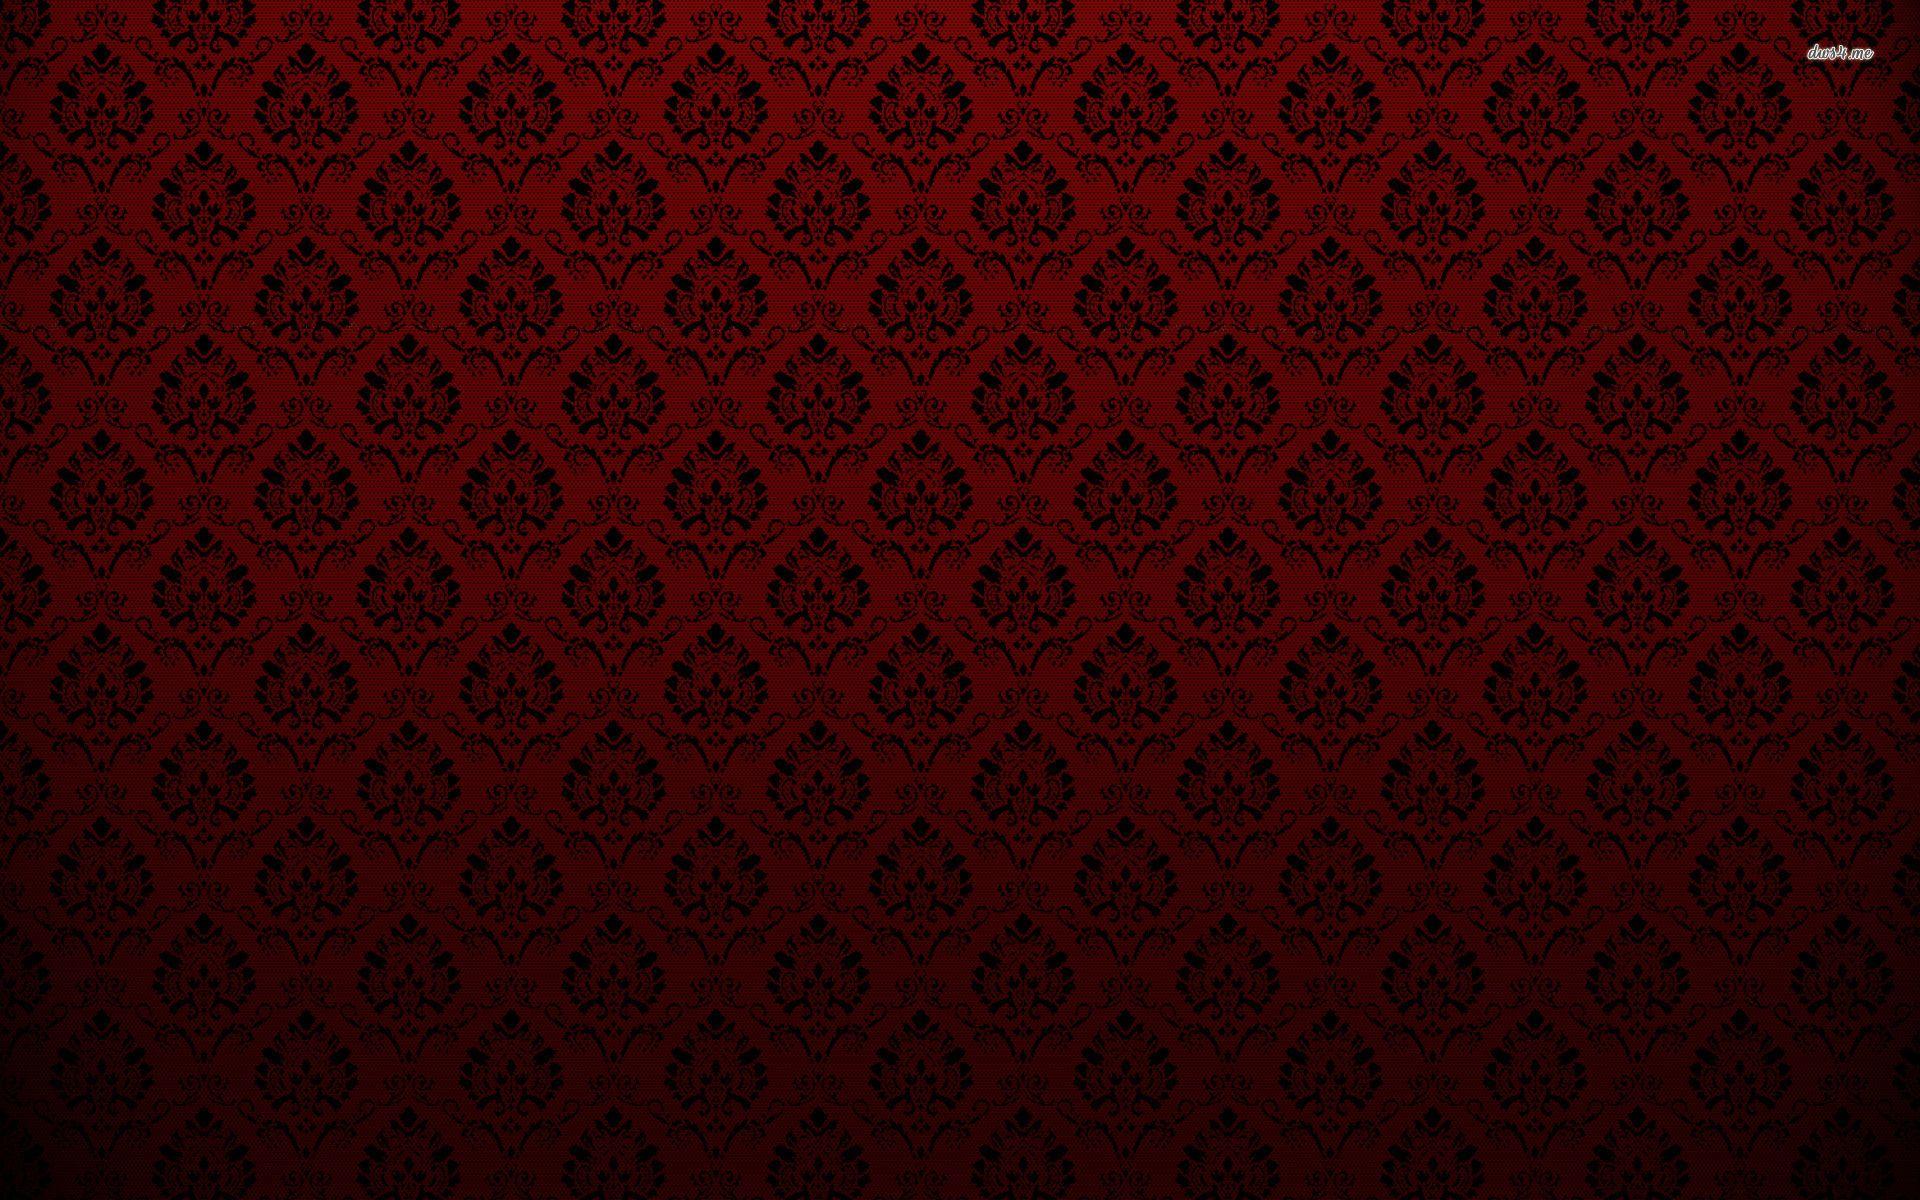 Burgundy Wallpapers Group with 45 items